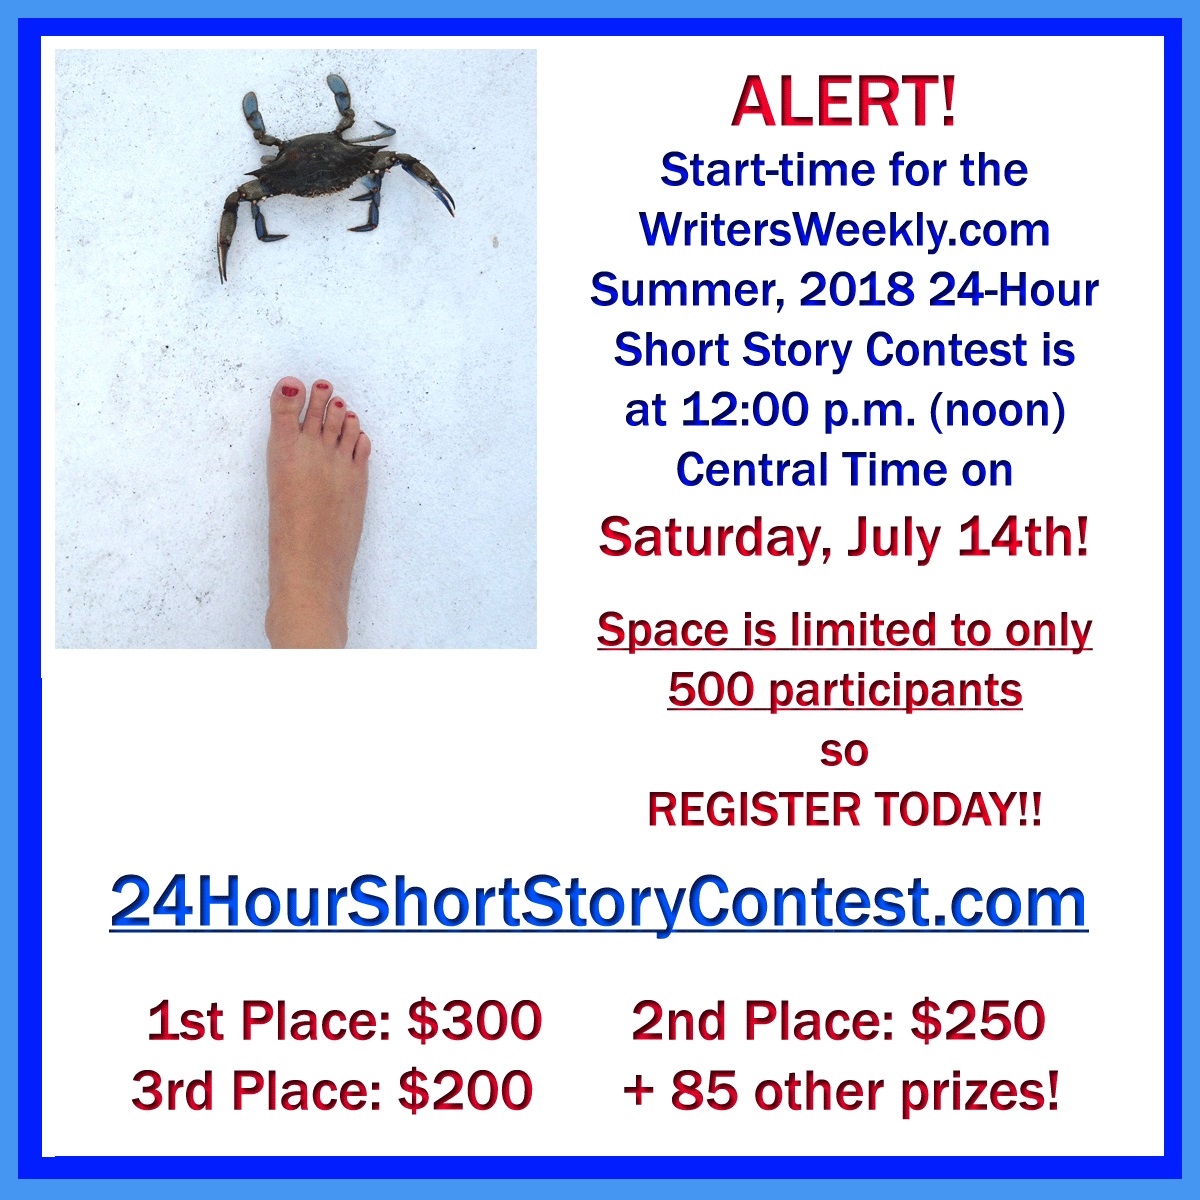 ON SATURDAY, APRIL 21st – Join Us for the Spring, 2018 24-Hour Short Story Contest – 1st Place Gets $300!!